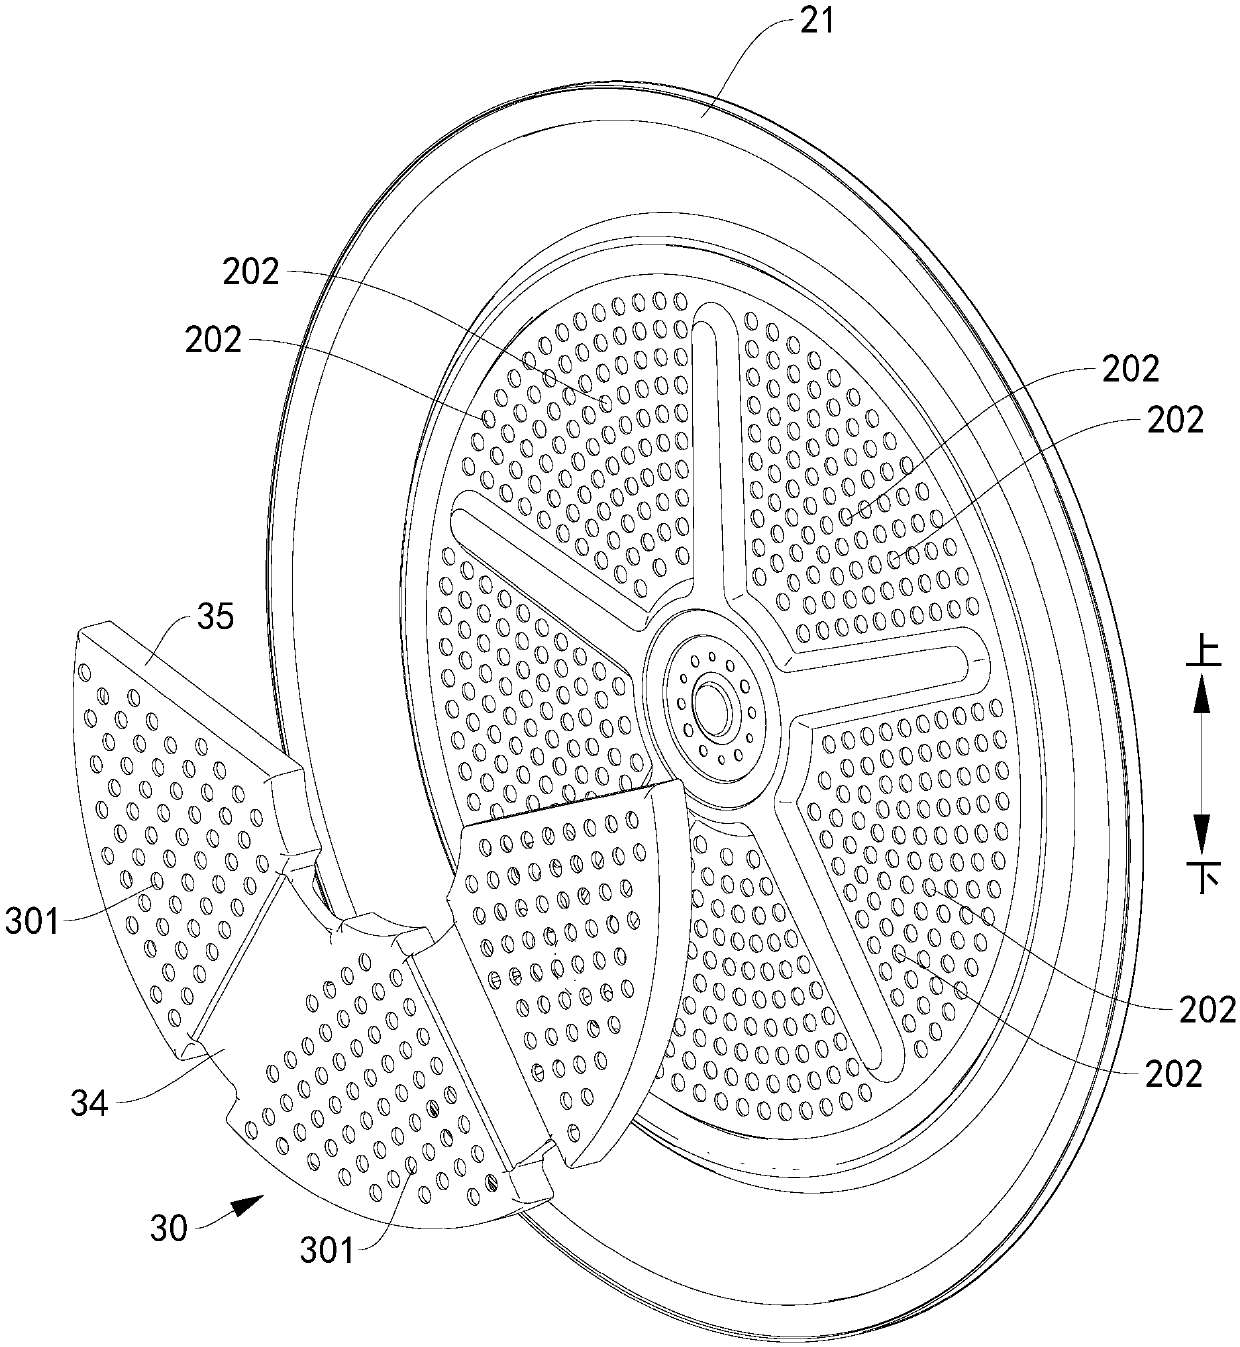 Clothes treatment device and inner cylinder assembly of clothes treatment device